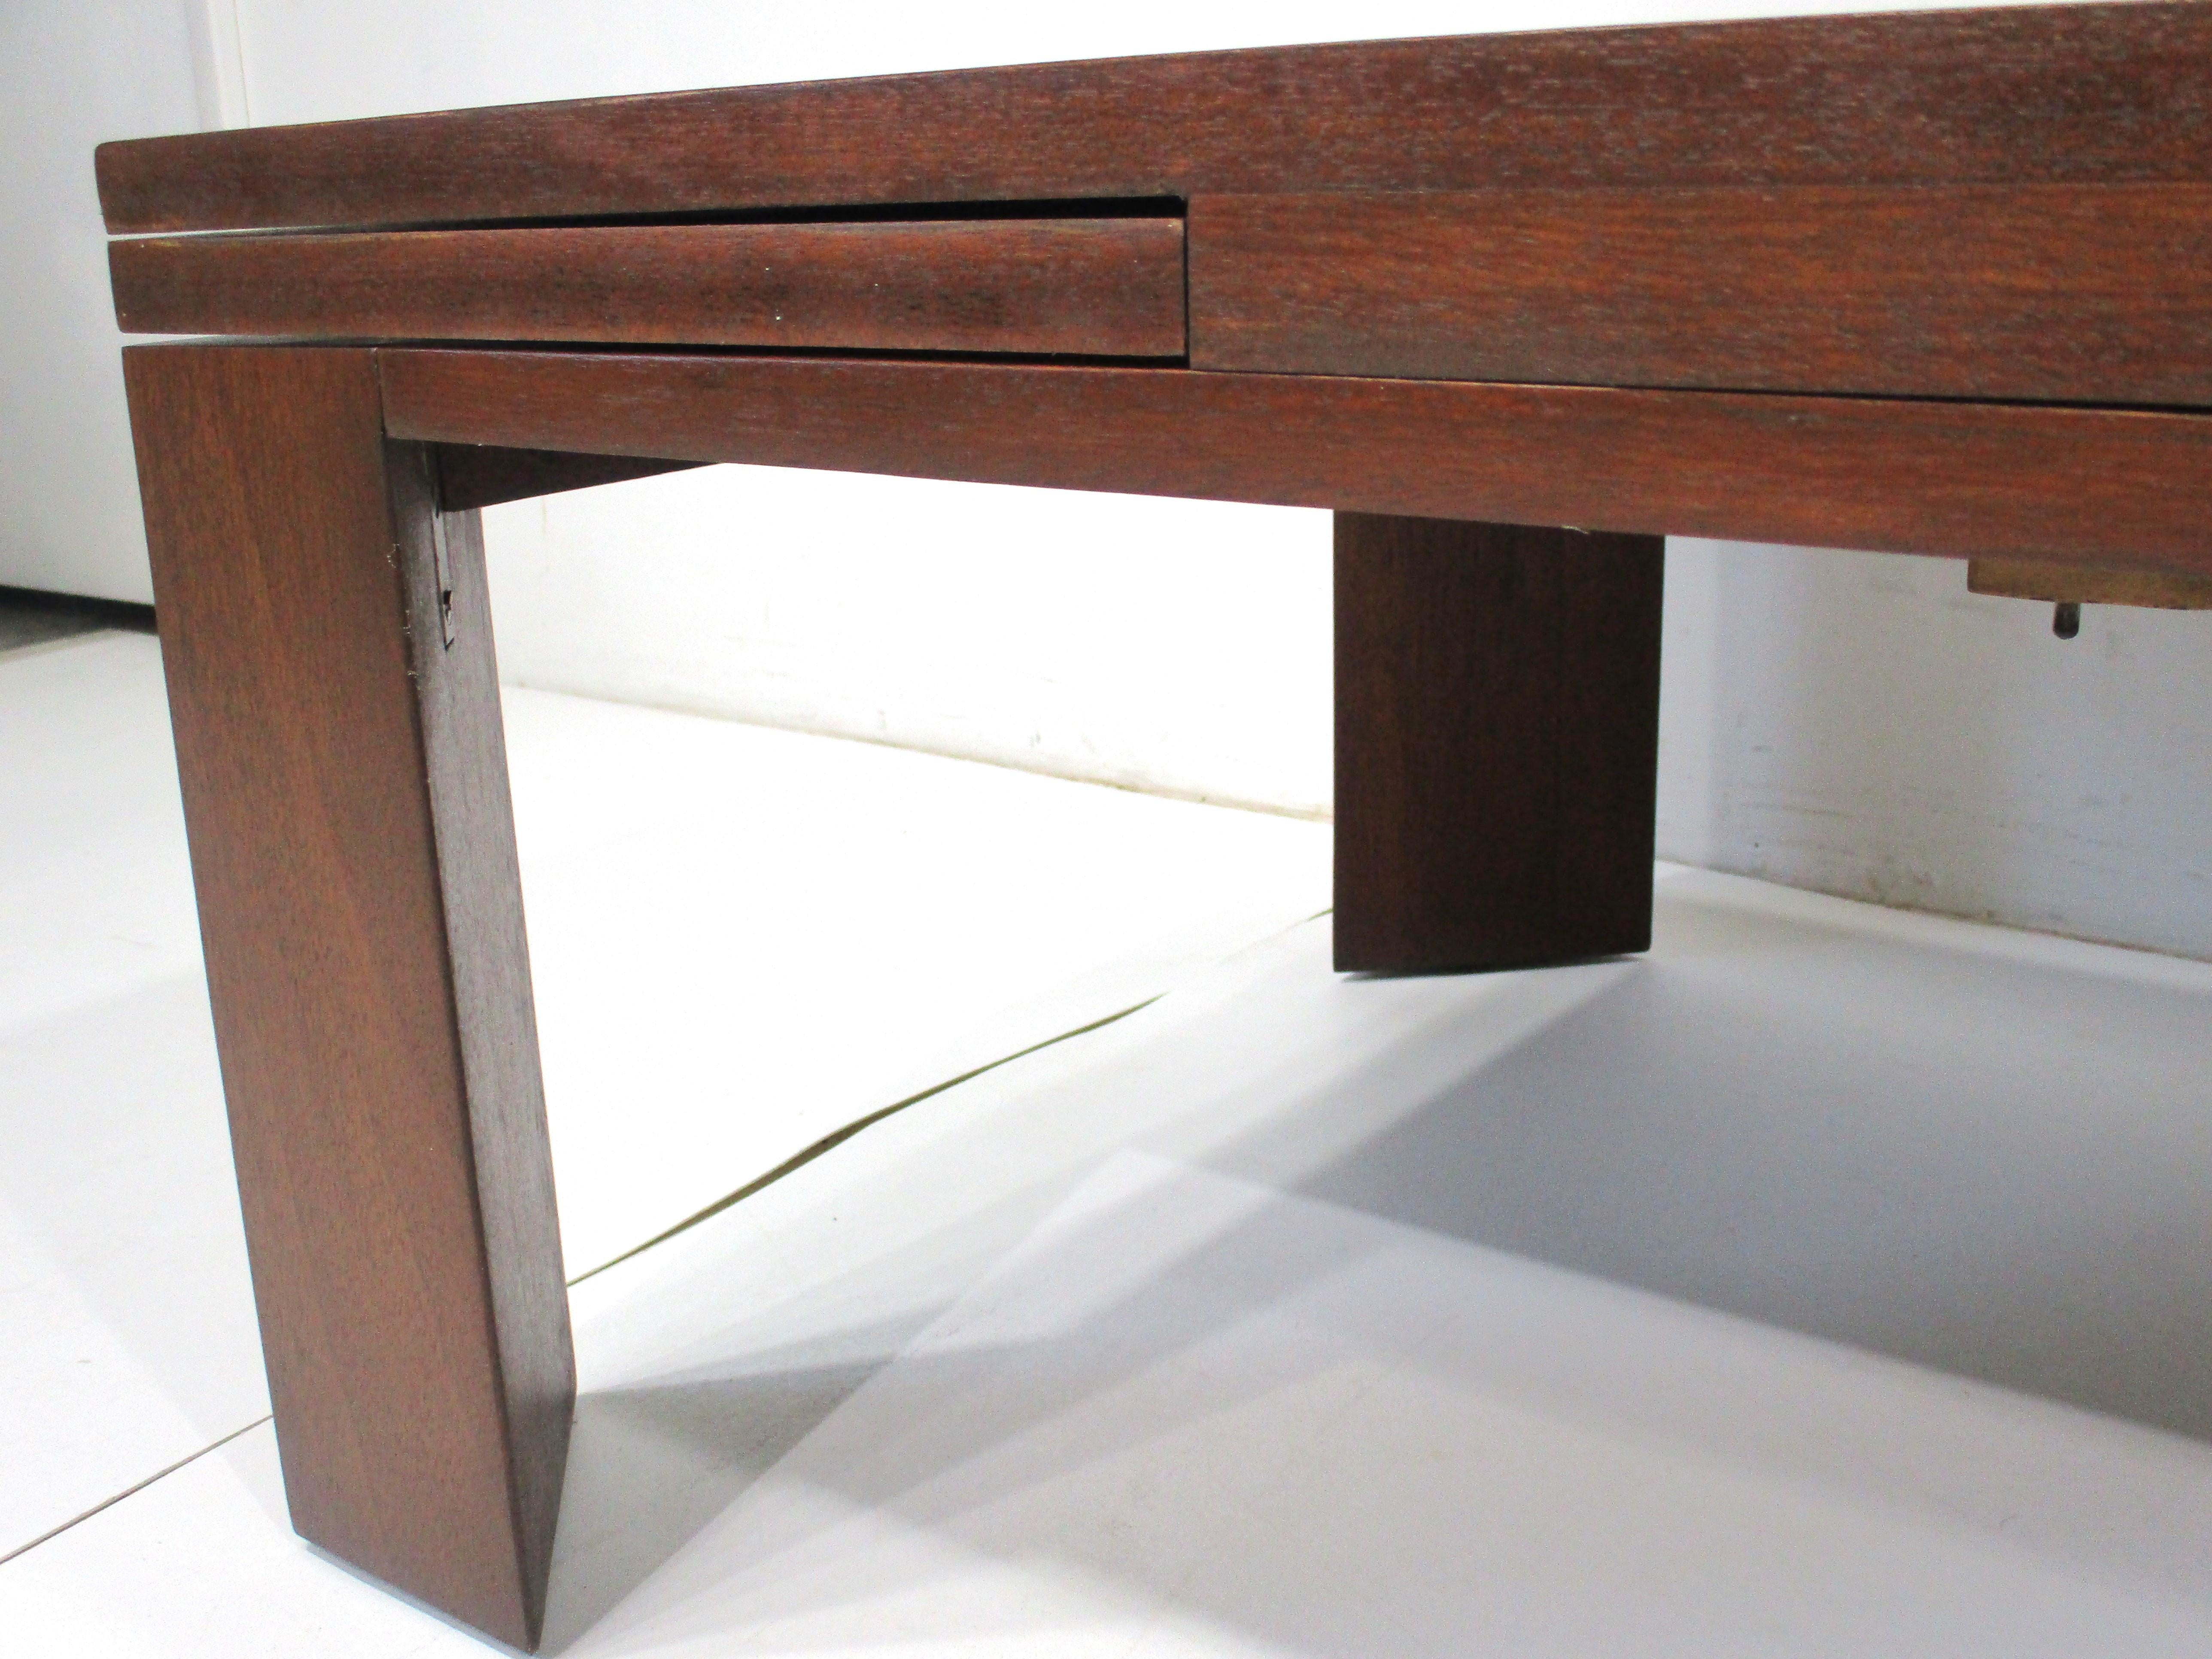 20th Century Expandable Refectory Coffee Table by Edward Wormley for Dunbar  For Sale